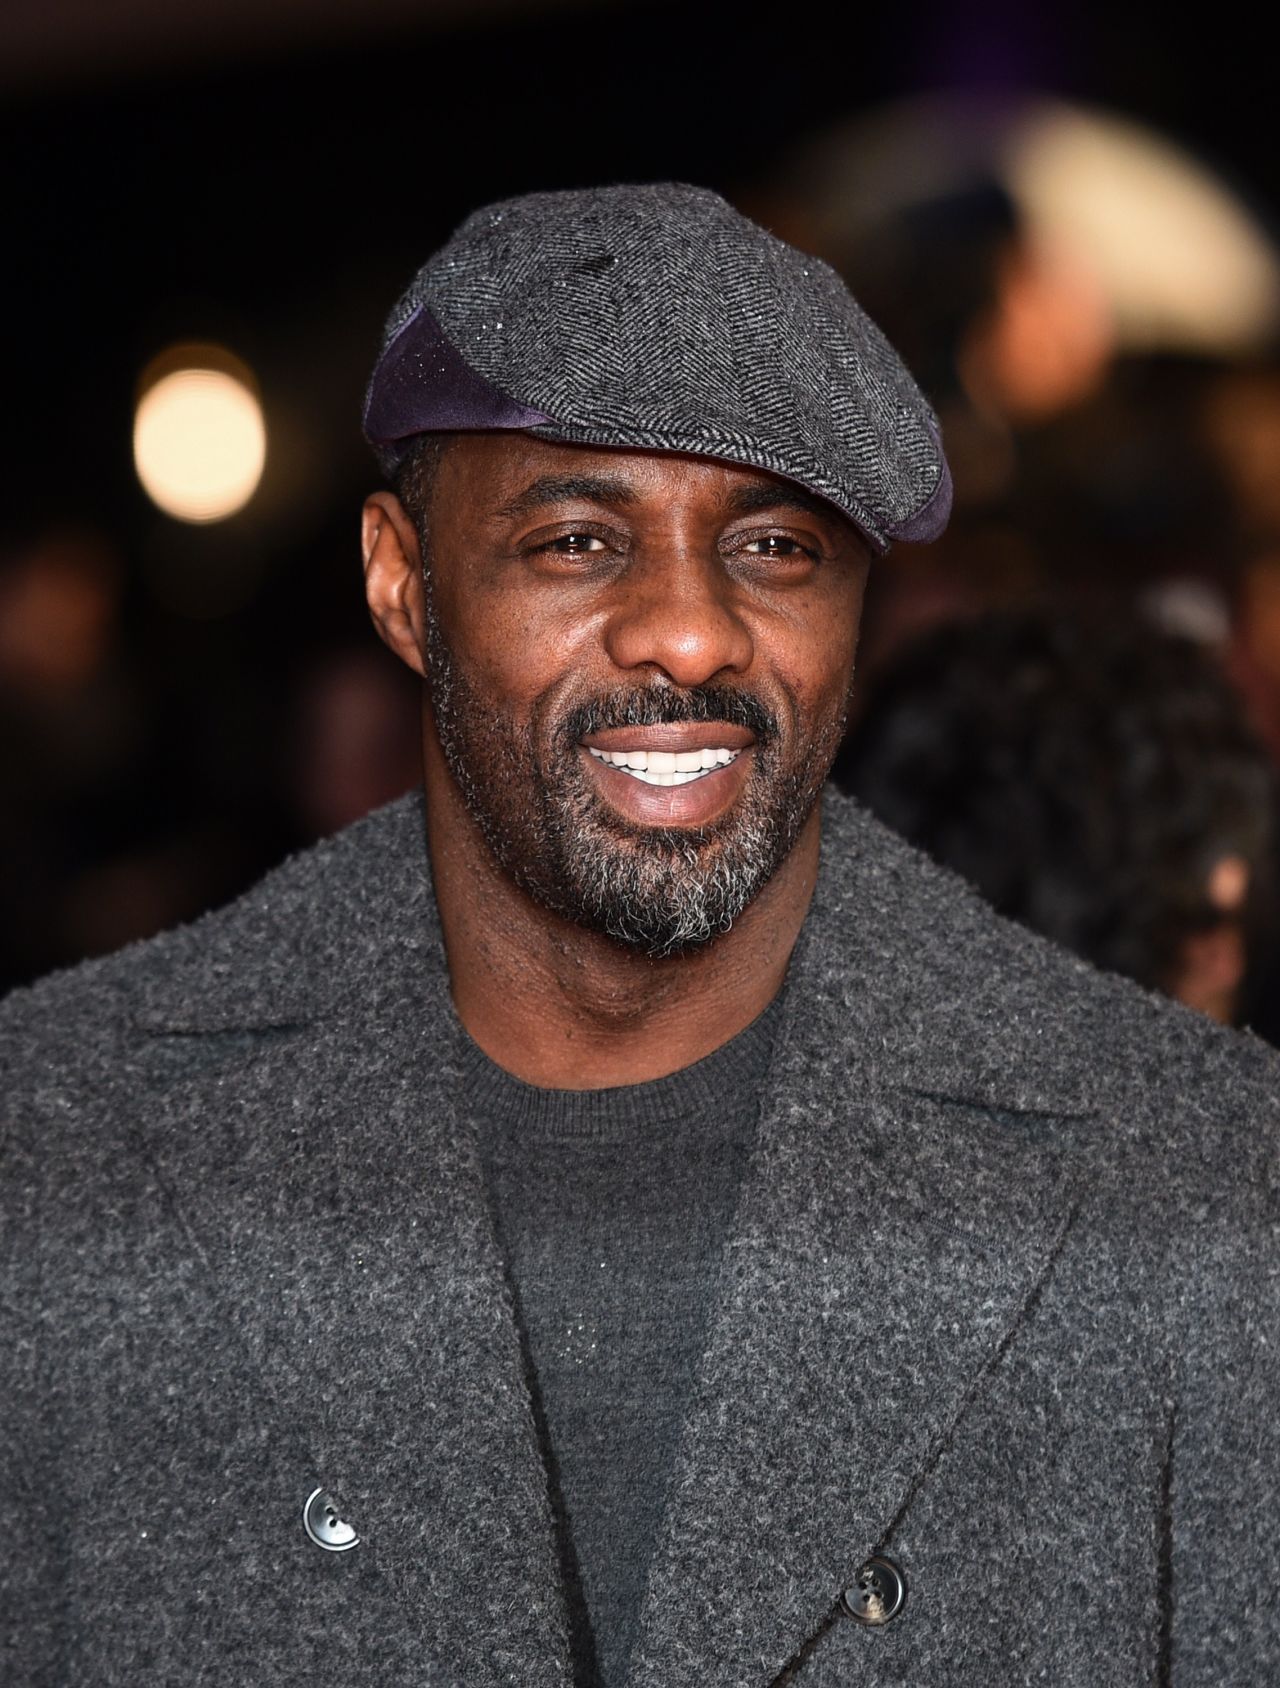 Who's going to be the next James Bond? Well, it's unlikely to be Idris Elba. The writer of the new Bond novel set off a social media firestorm with a comment that the British actor is <a href="http://www.cnn.com/2015/09/01/entertainment/idris-elba-bond-anthony-horowitz-feat/index.html">"too street" to play the suave spy</a>.